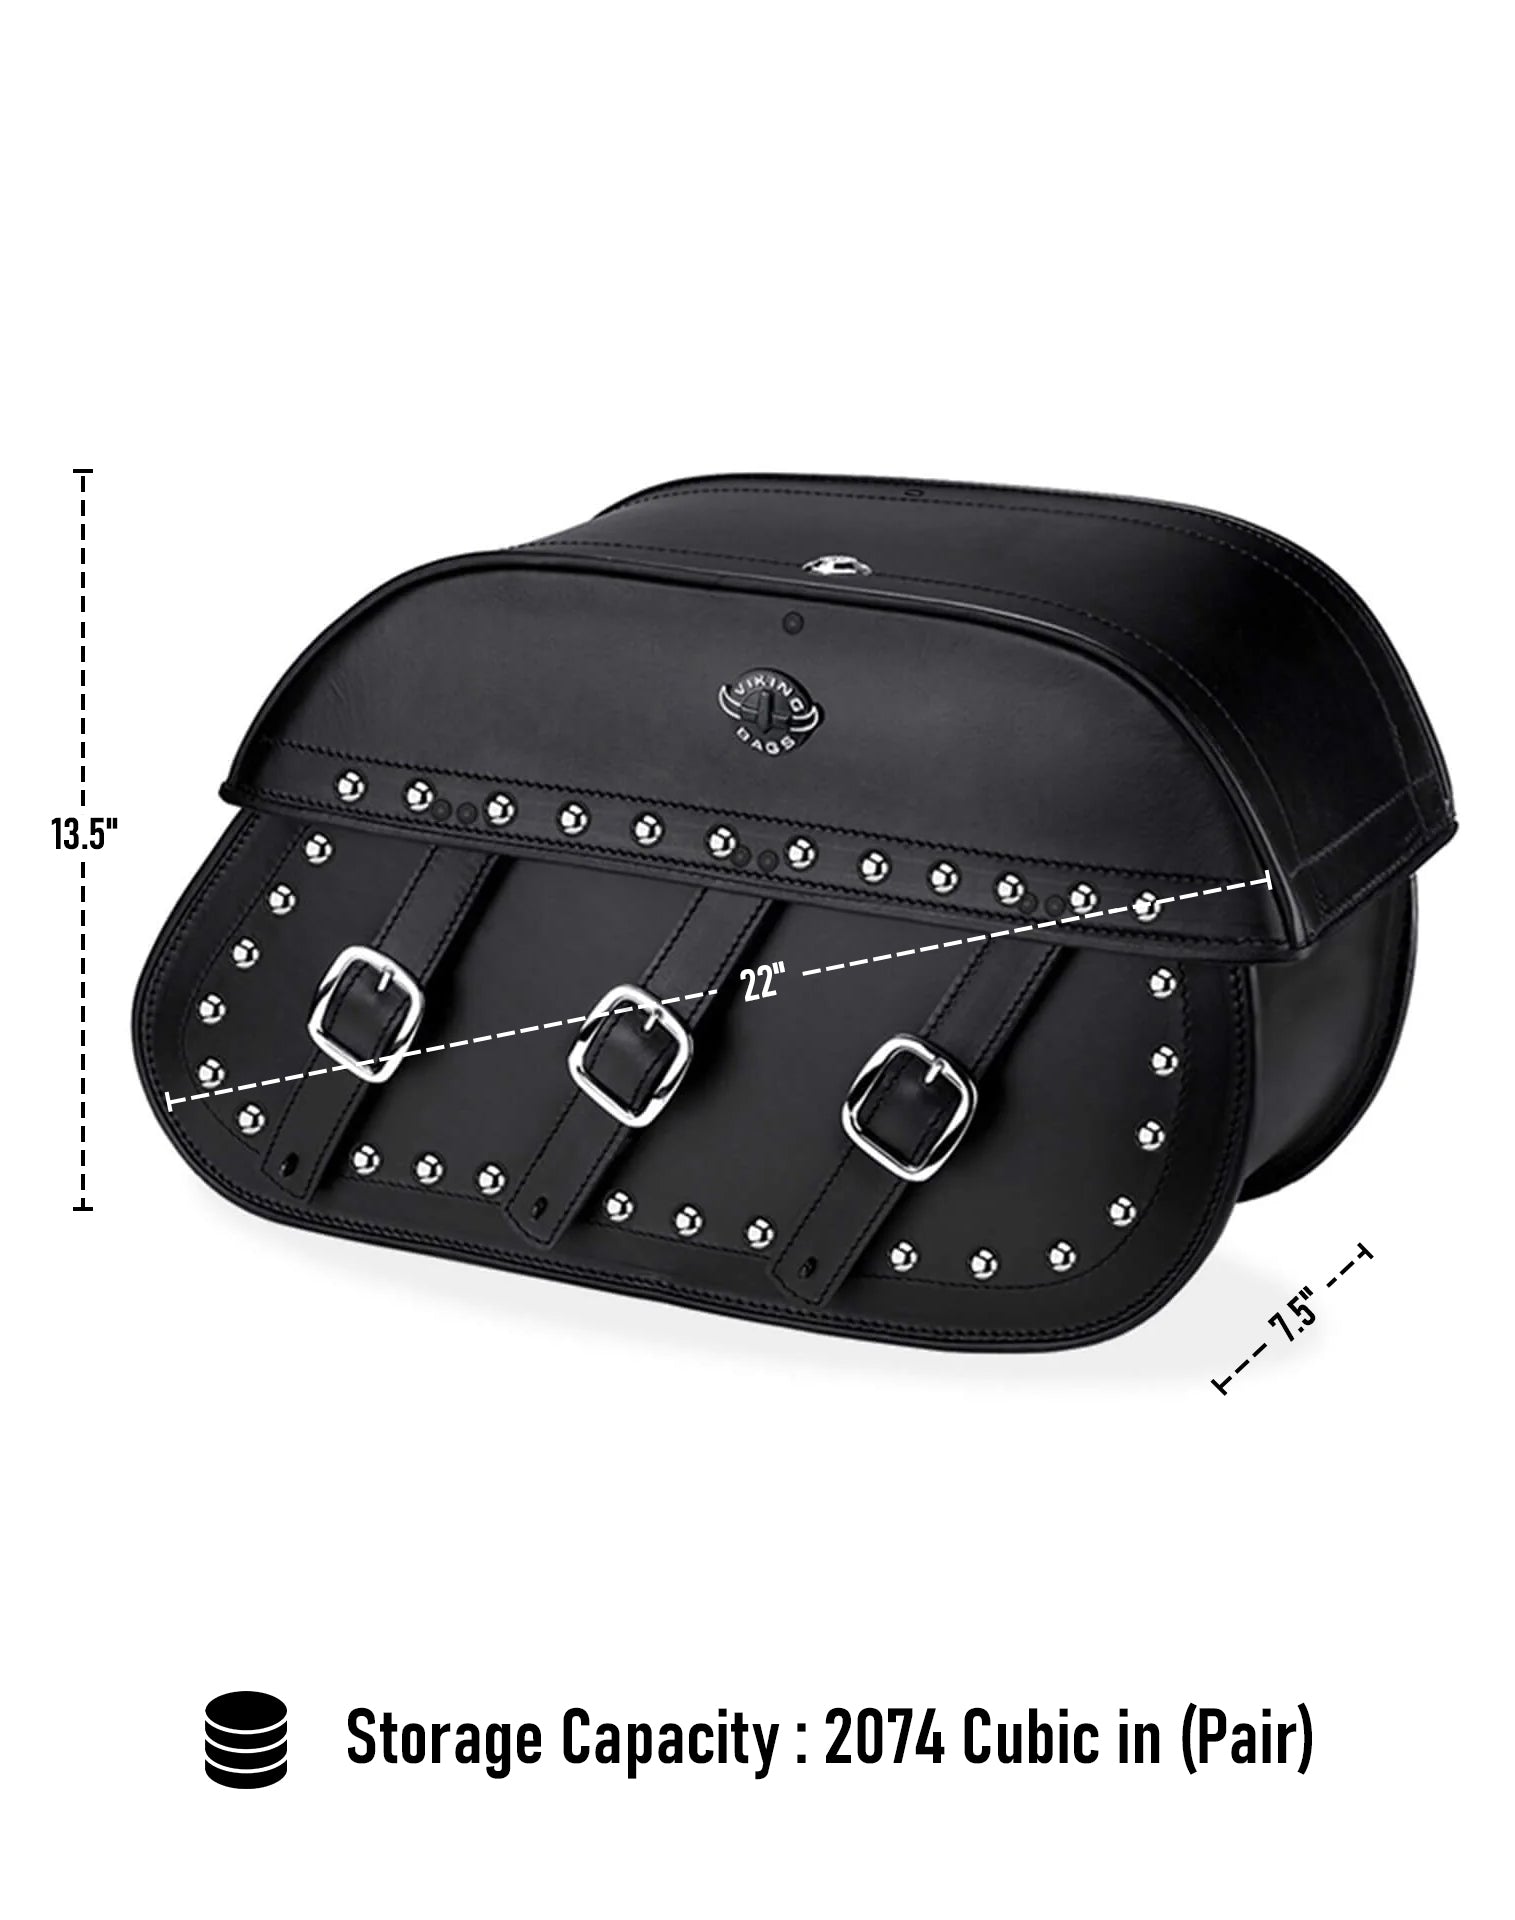 Viking Trianon Extra Large Studded Leather Motorcycle Saddlebags For Harley Softail Sport Glide Flsb Can Store Your Ridings Gears